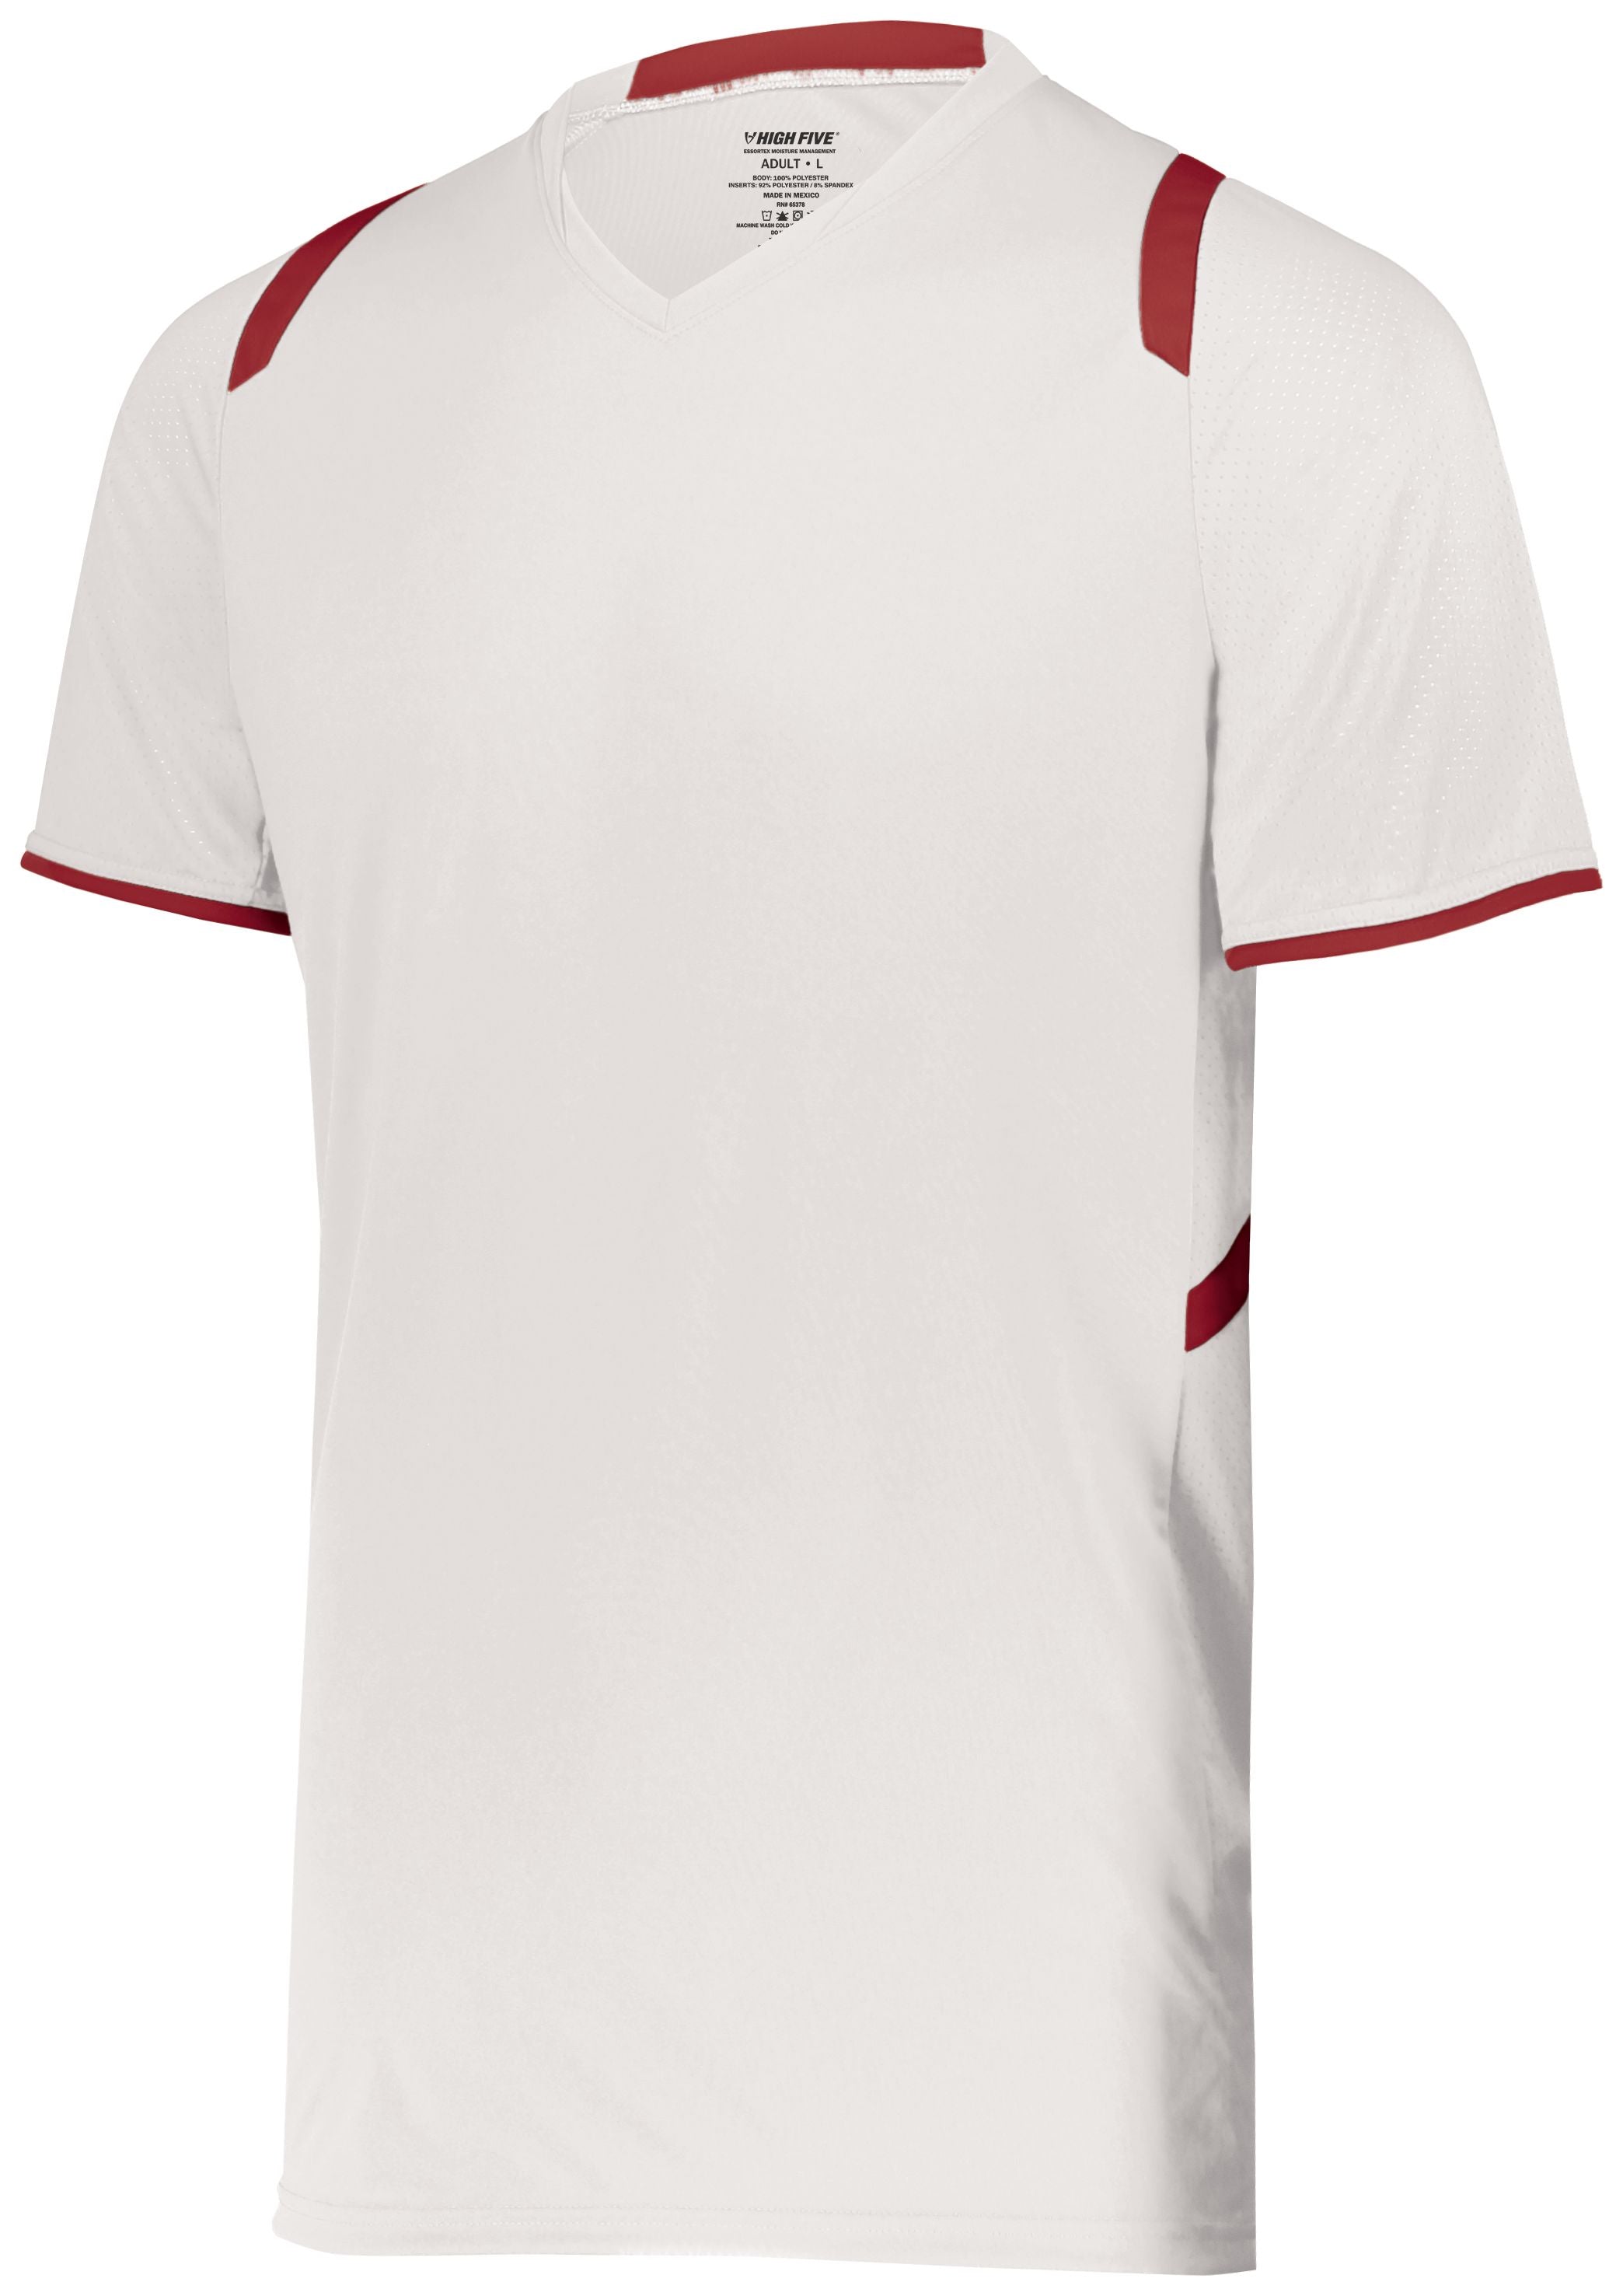 High 5 Youth Millennium Soccer Jersey in White/Scarlet  -Part of the Youth, Youth-Jersey, High5-Products, Soccer, Shirts, All-Sports-1 product lines at KanaleyCreations.com